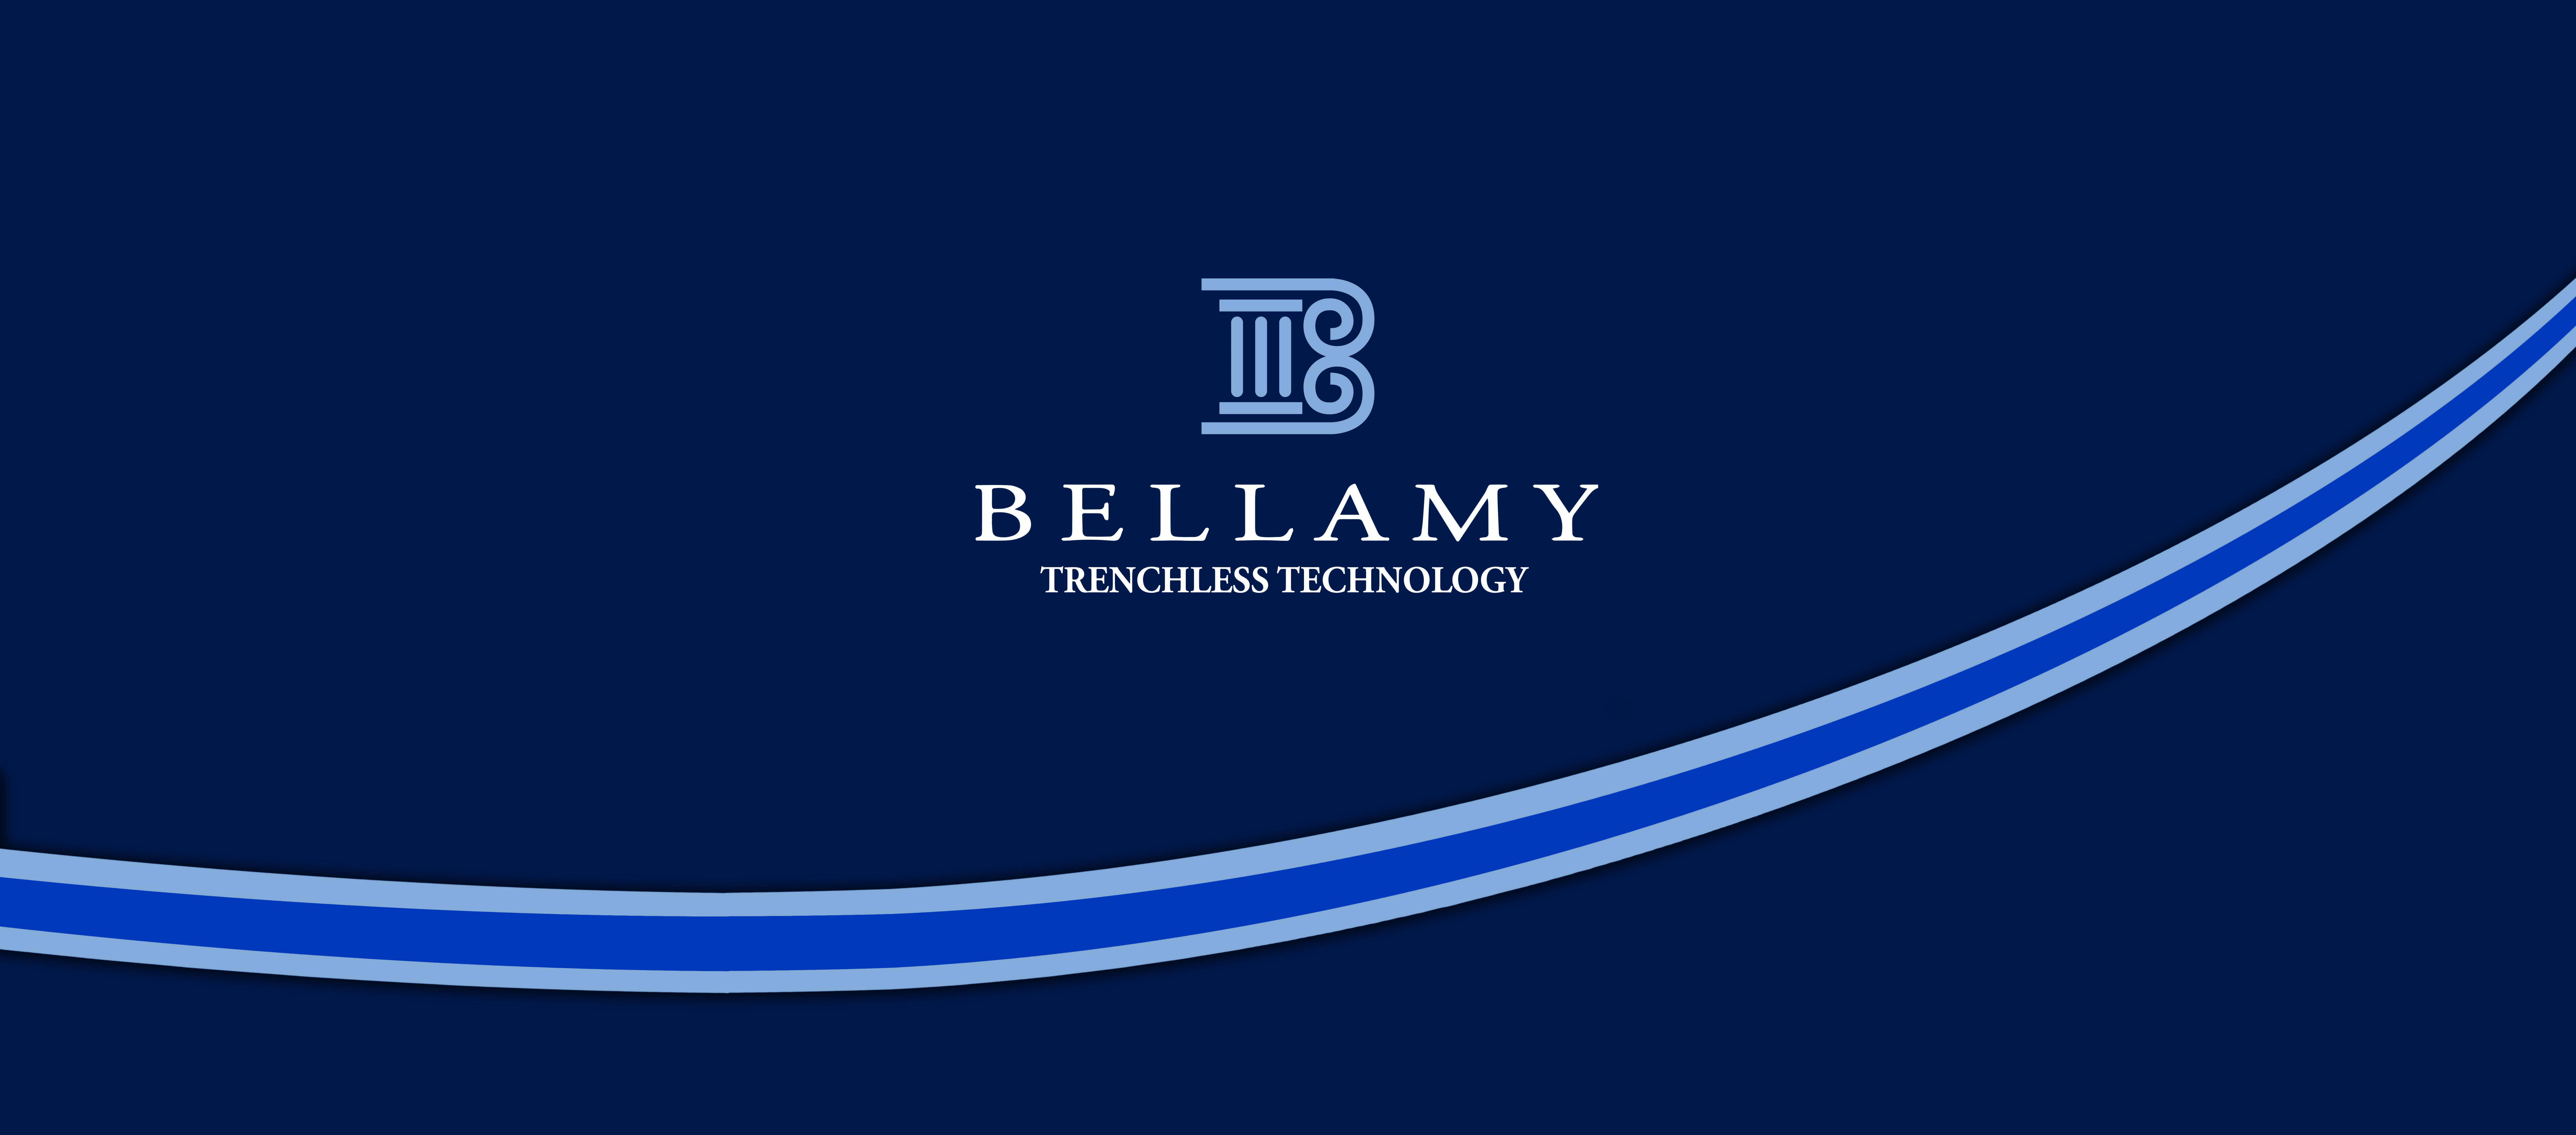 Bellamy Construction Specializing in all thing Excavation